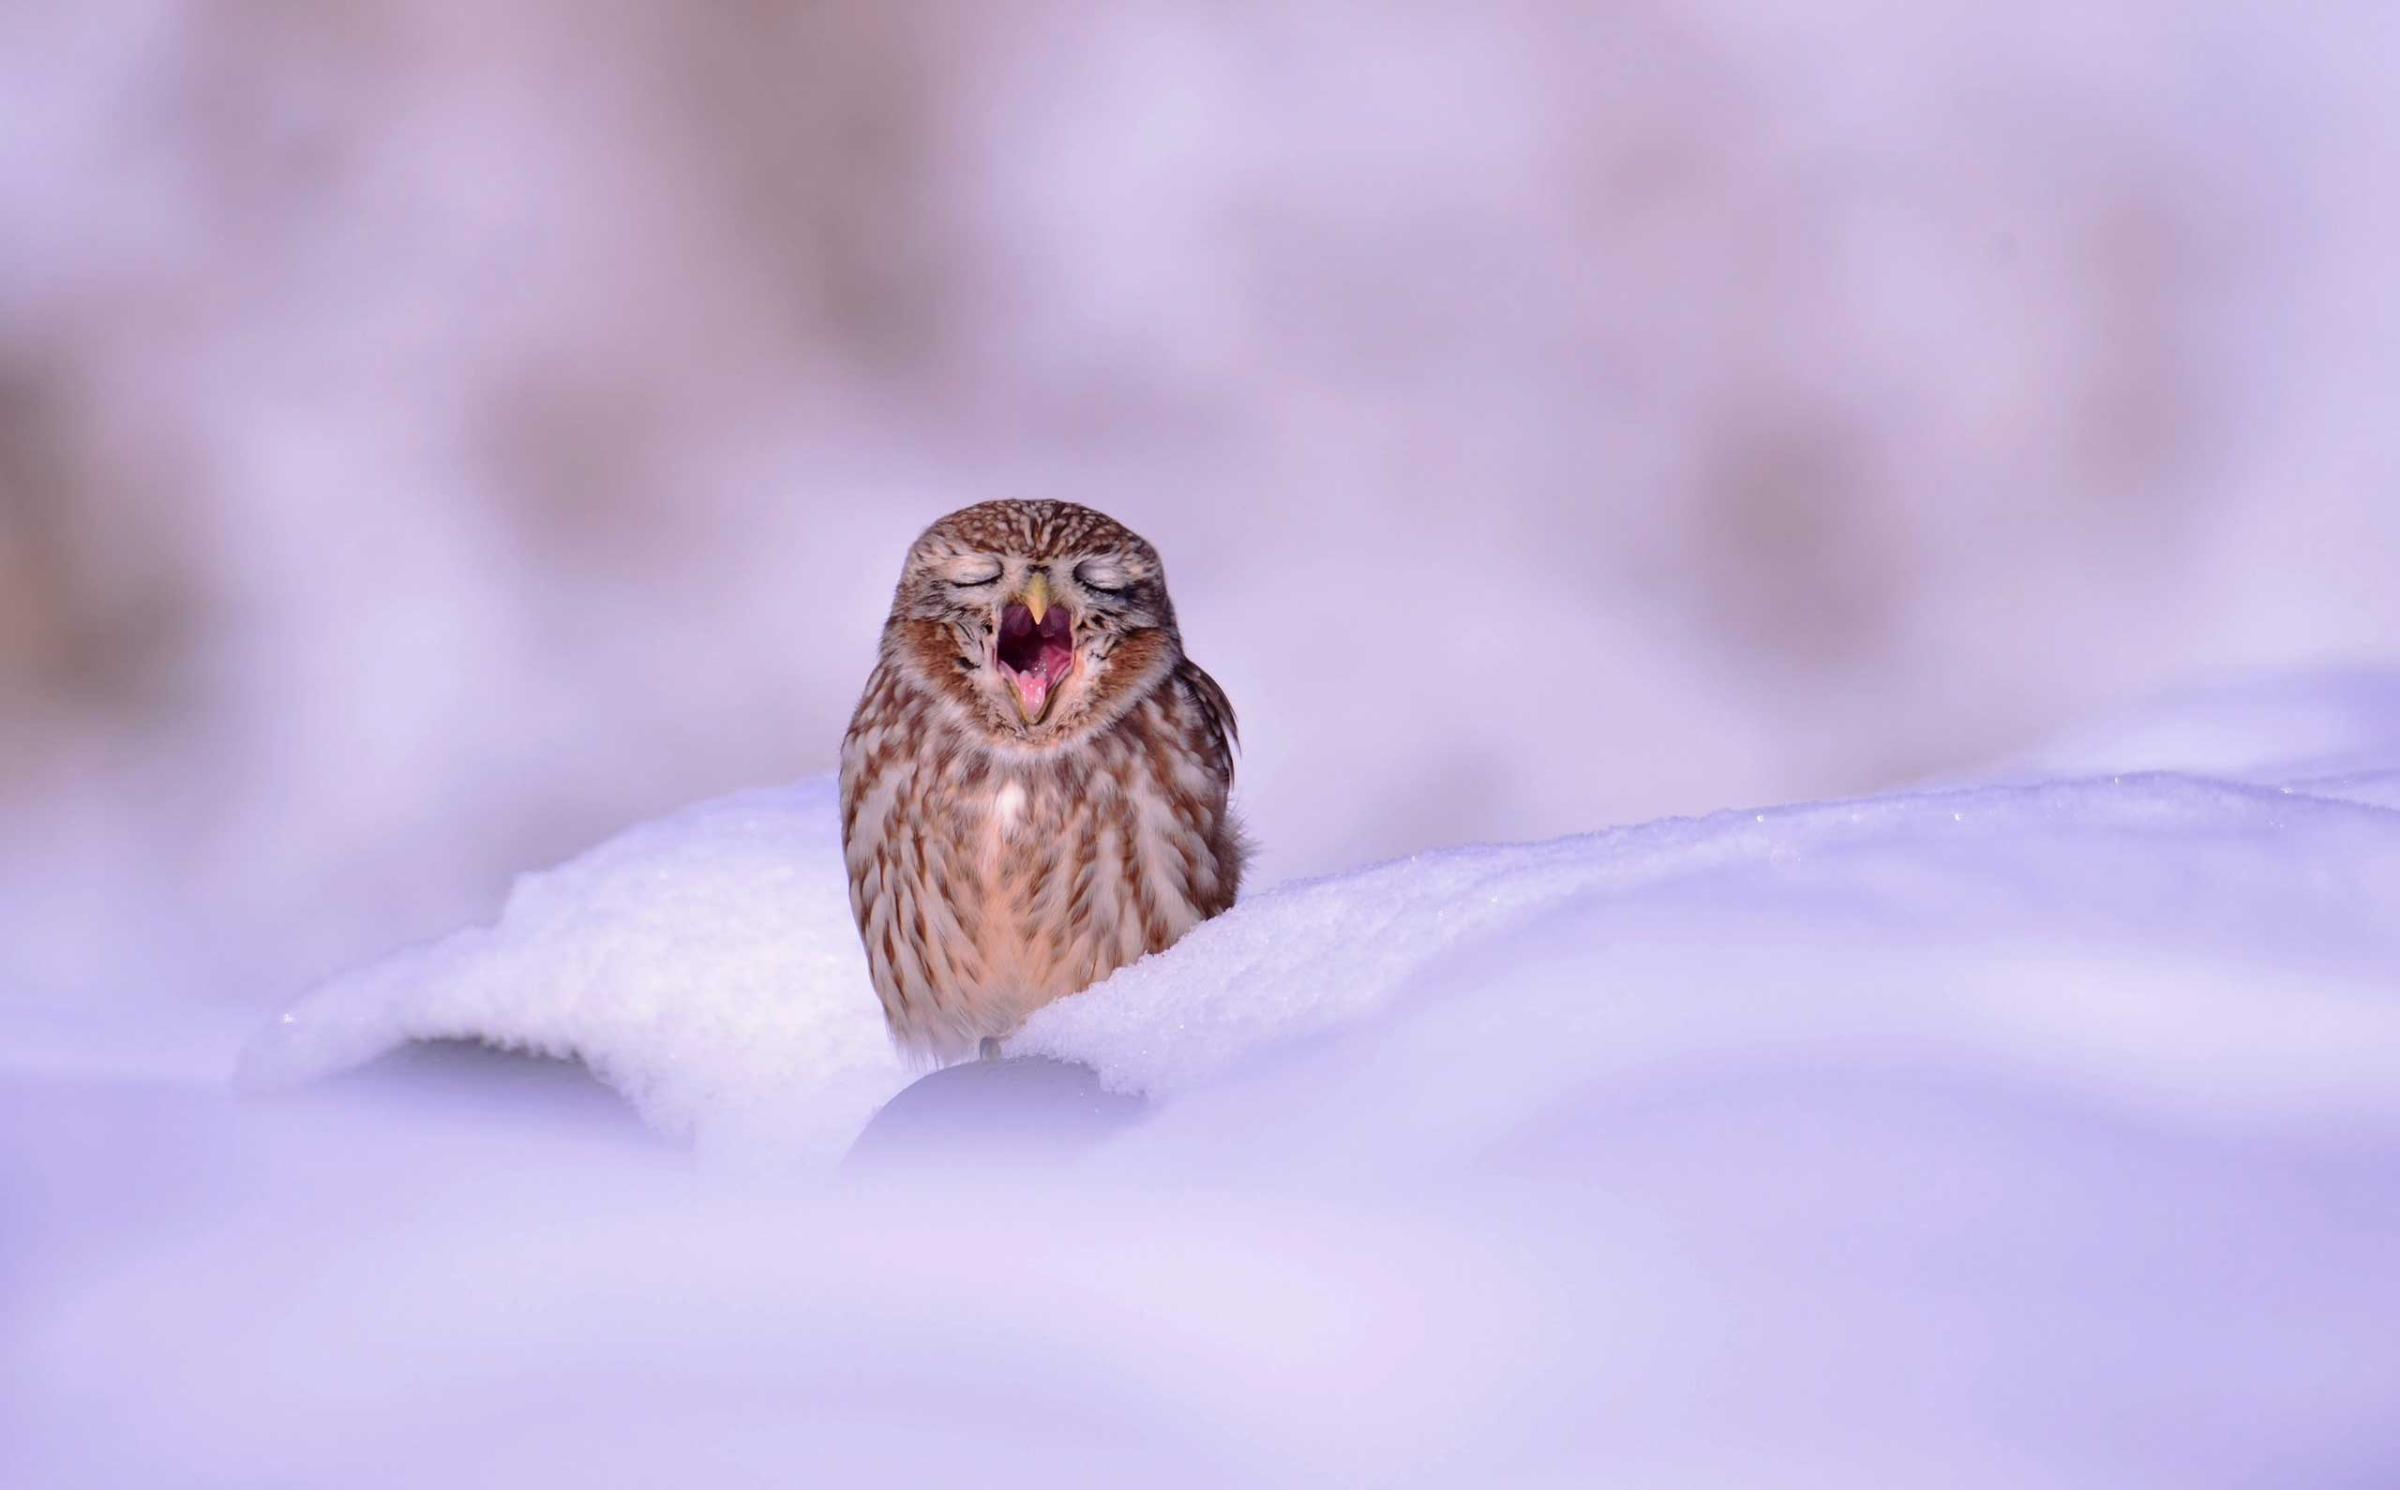 A small owl yawns as it sits in the snow in Ansung City, Gyeonggi Province, South Korea, Dec. 4, 2014.